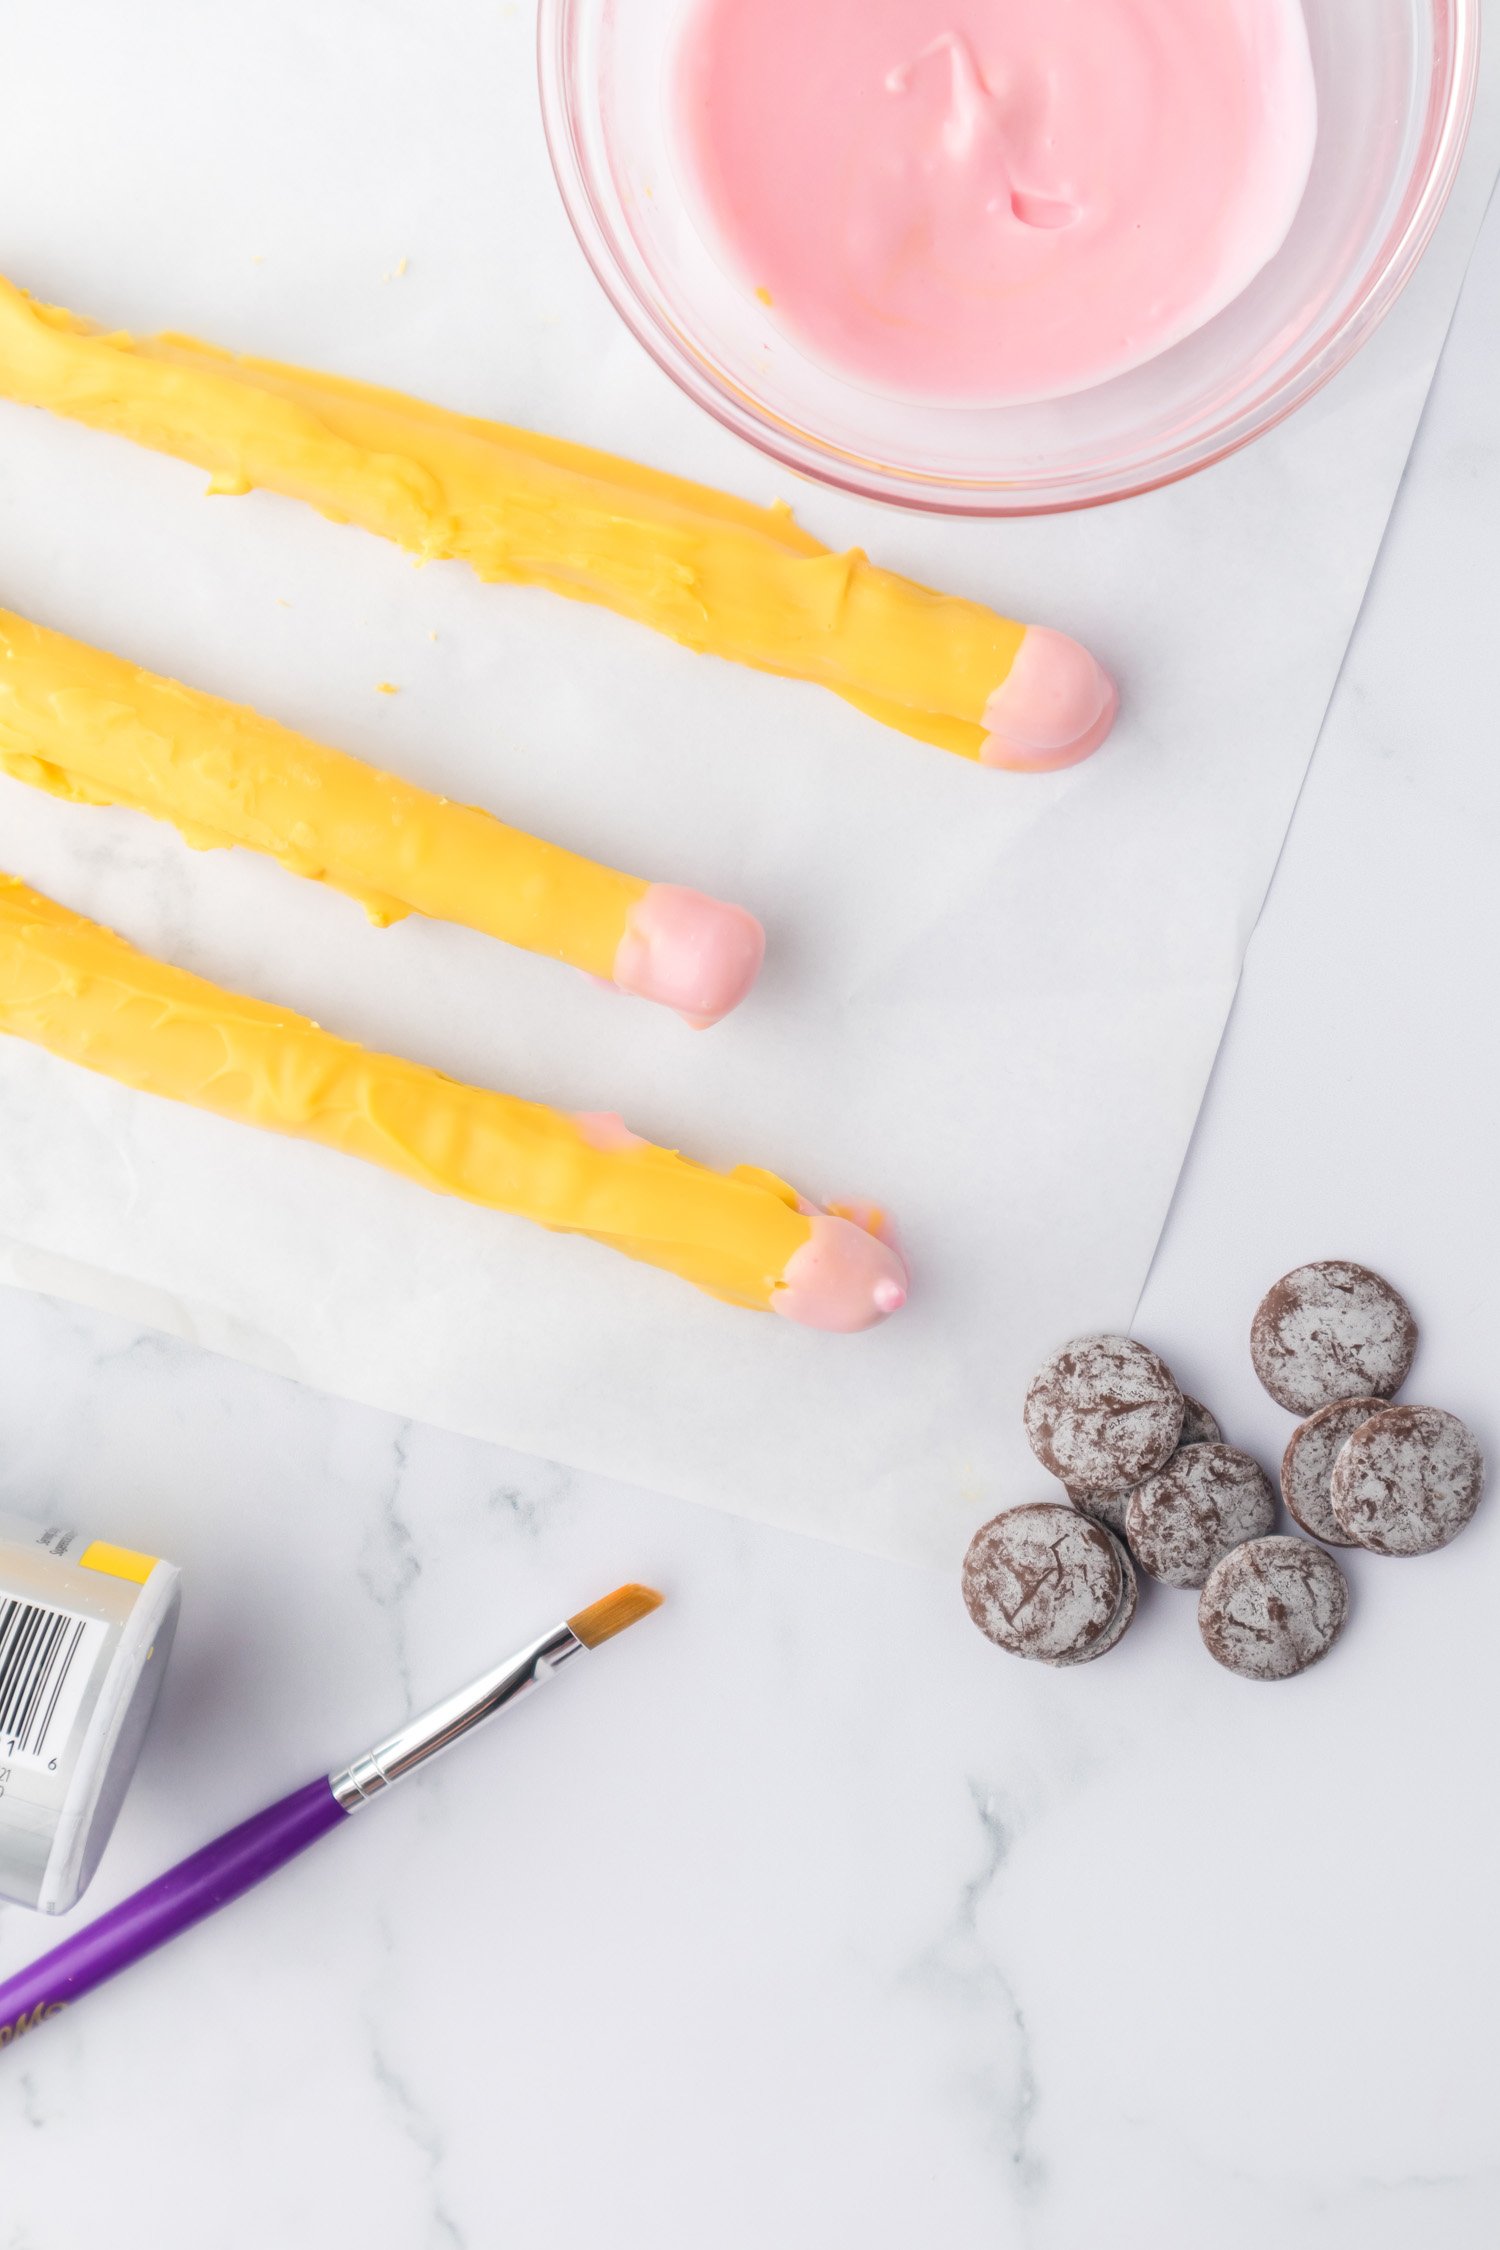 paint brushes and chocolate next to chocolate covered pretzel pencils